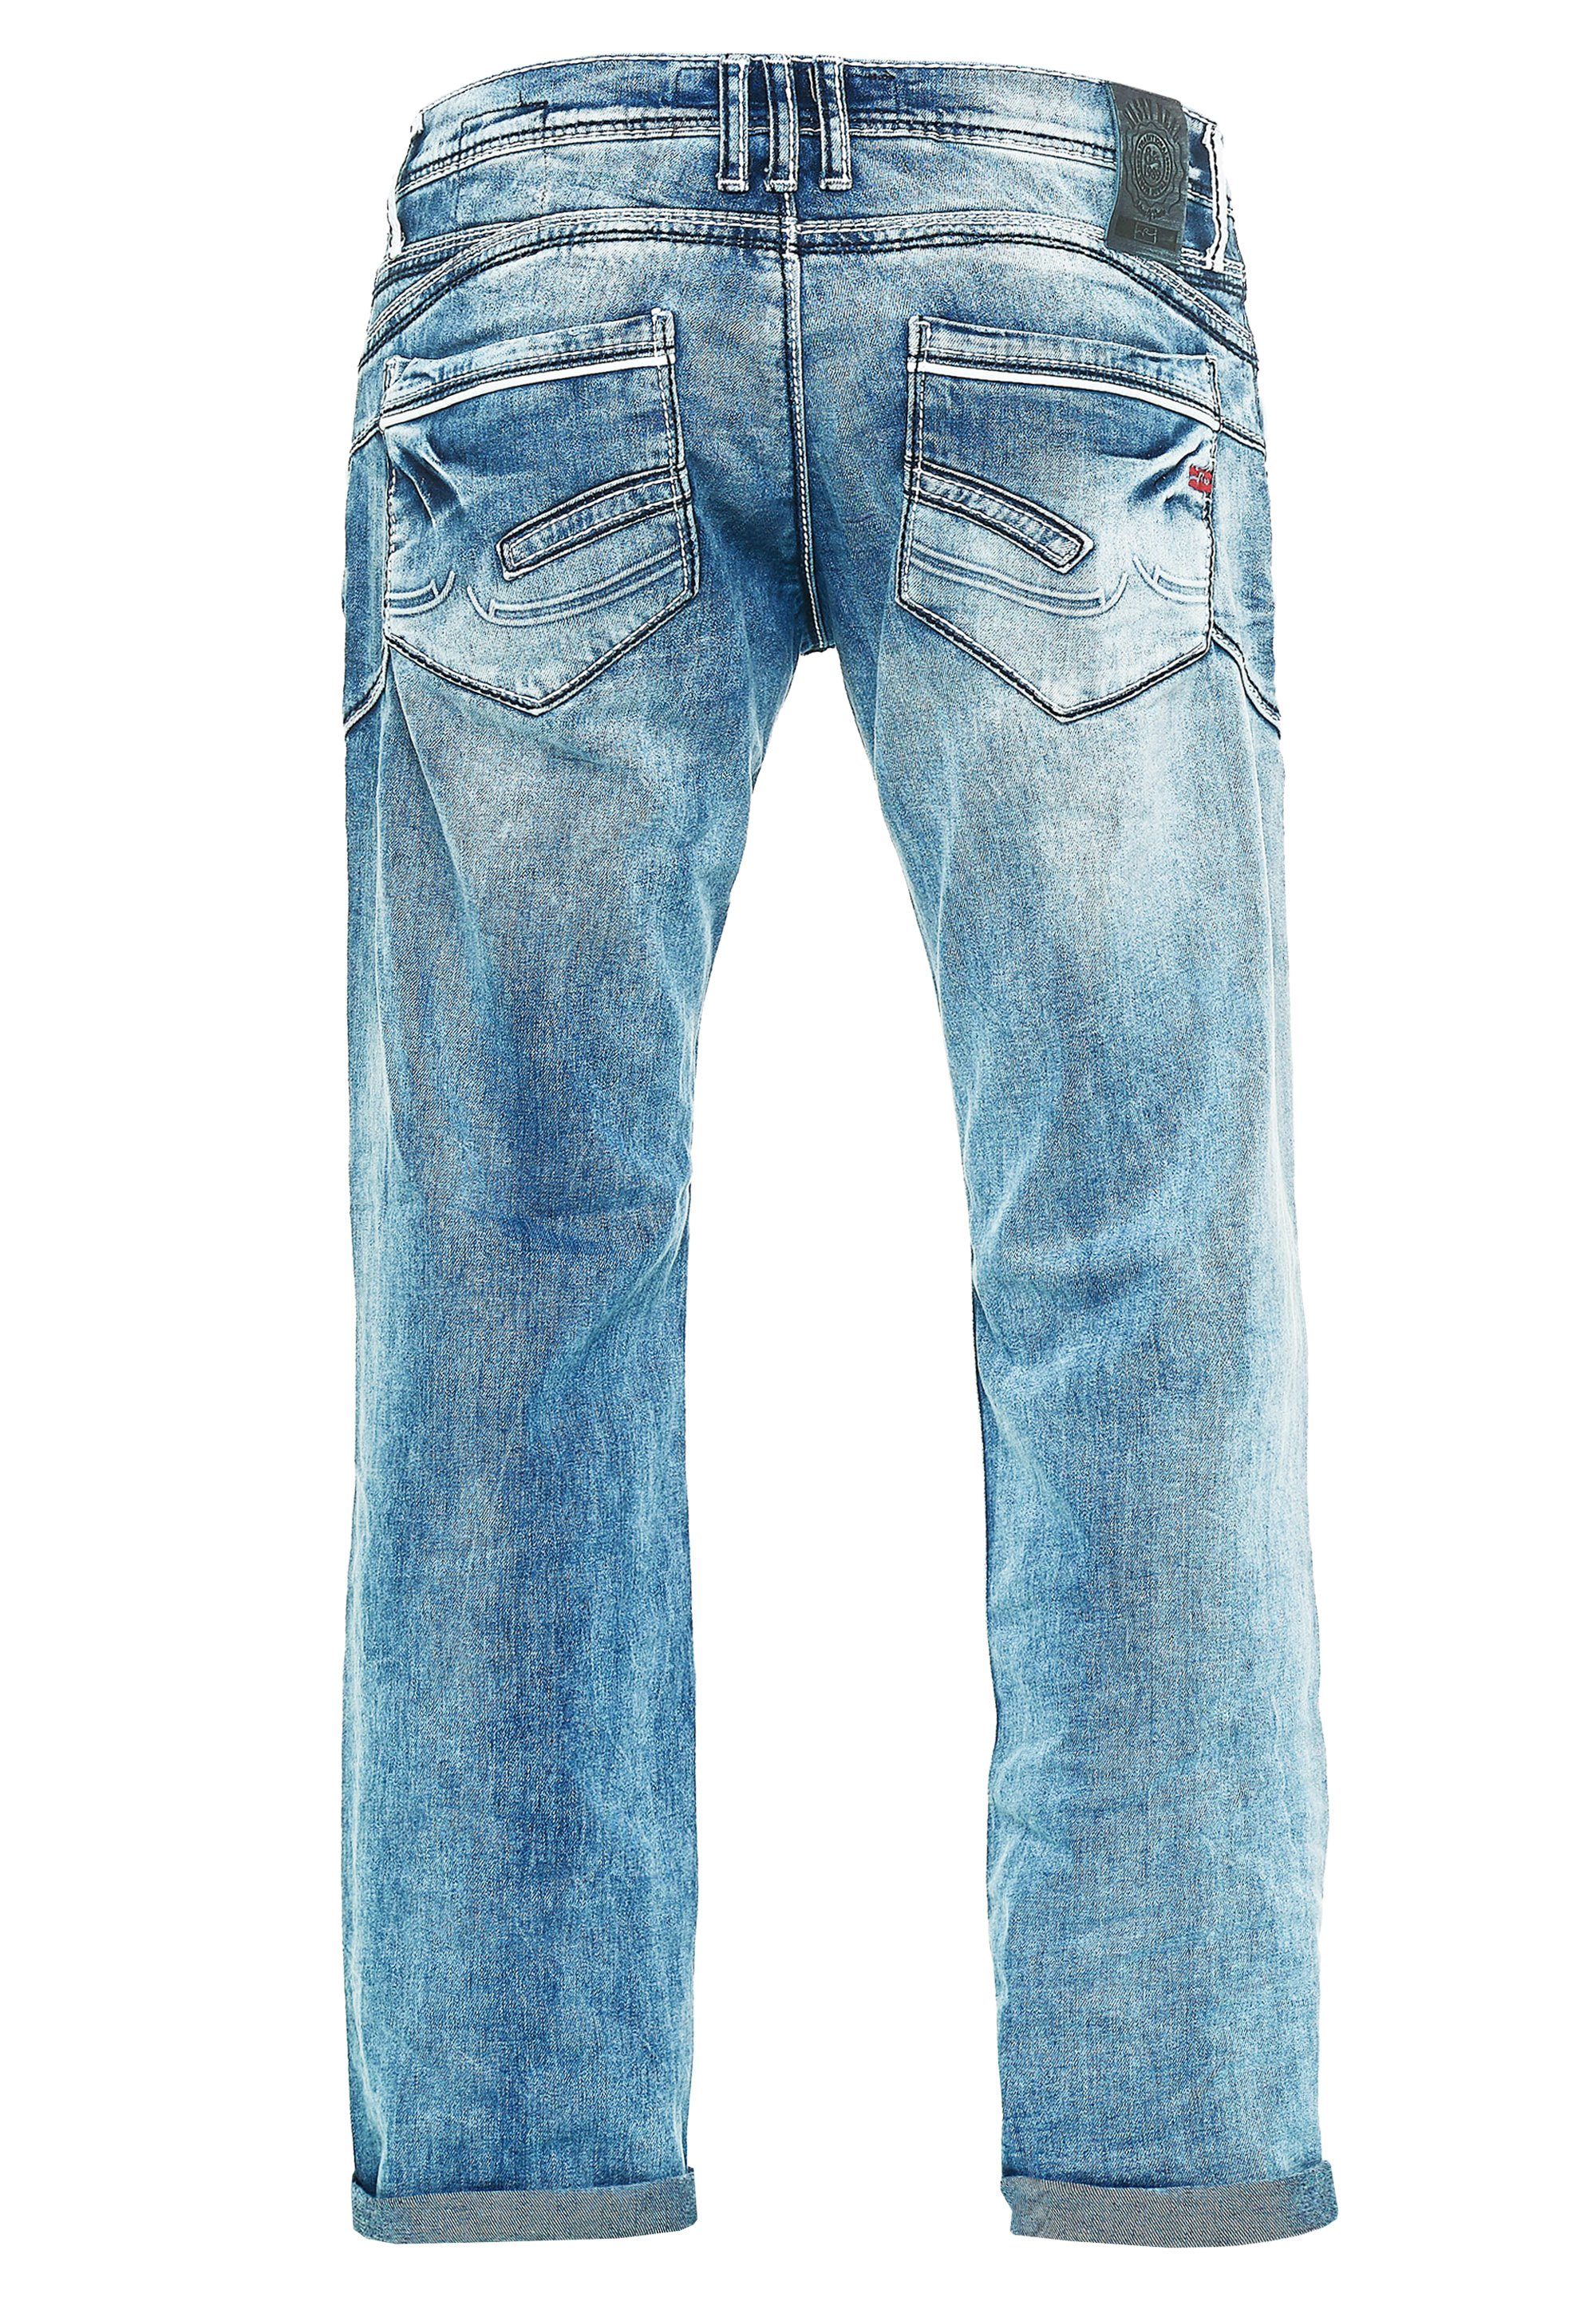 cooler Neal Jeans Bequeme Waschung mit Rusty